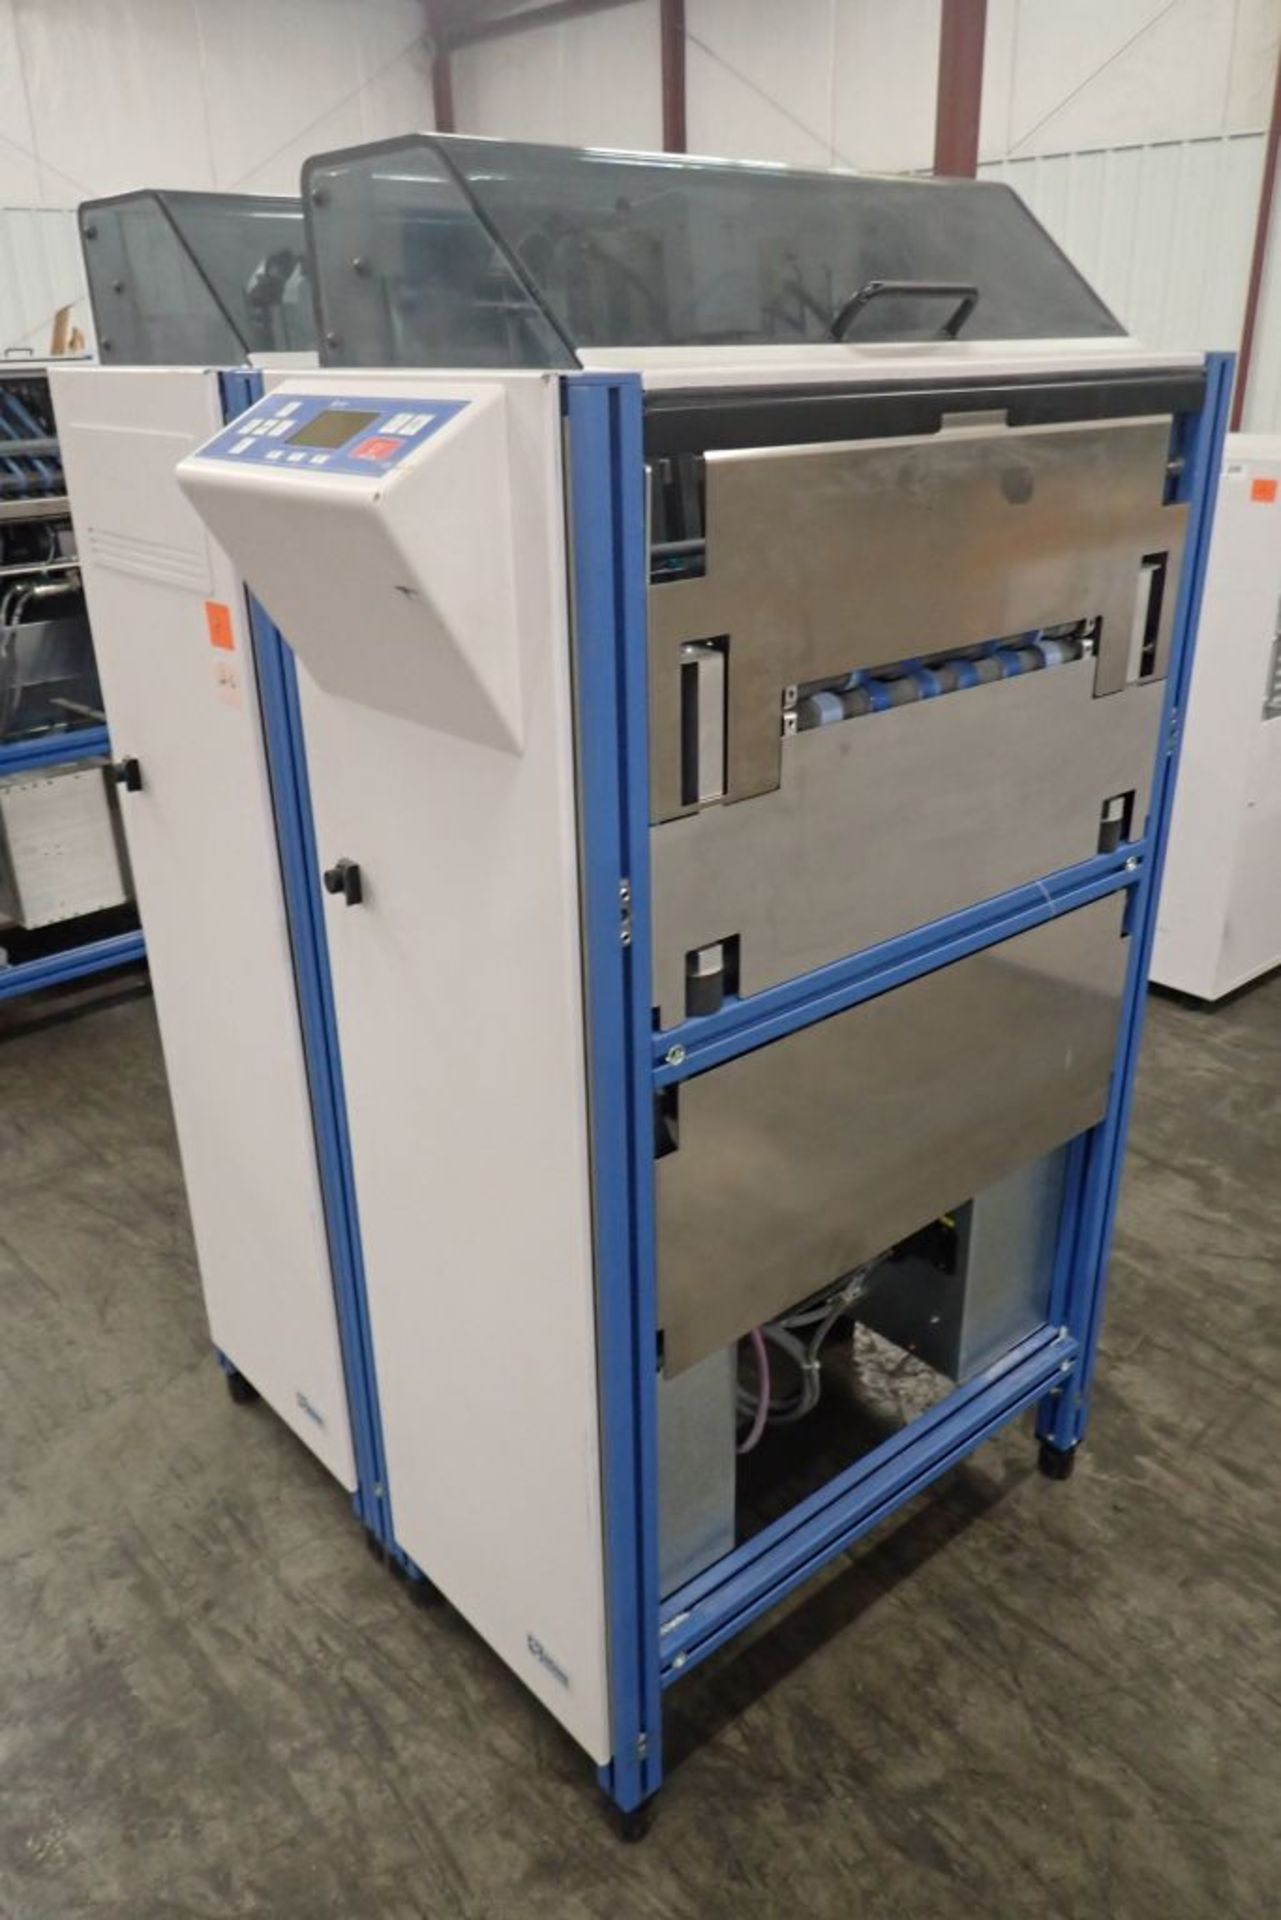 Bowe Systec Turbo Premium Automatic Mailing System - Image 36 of 356